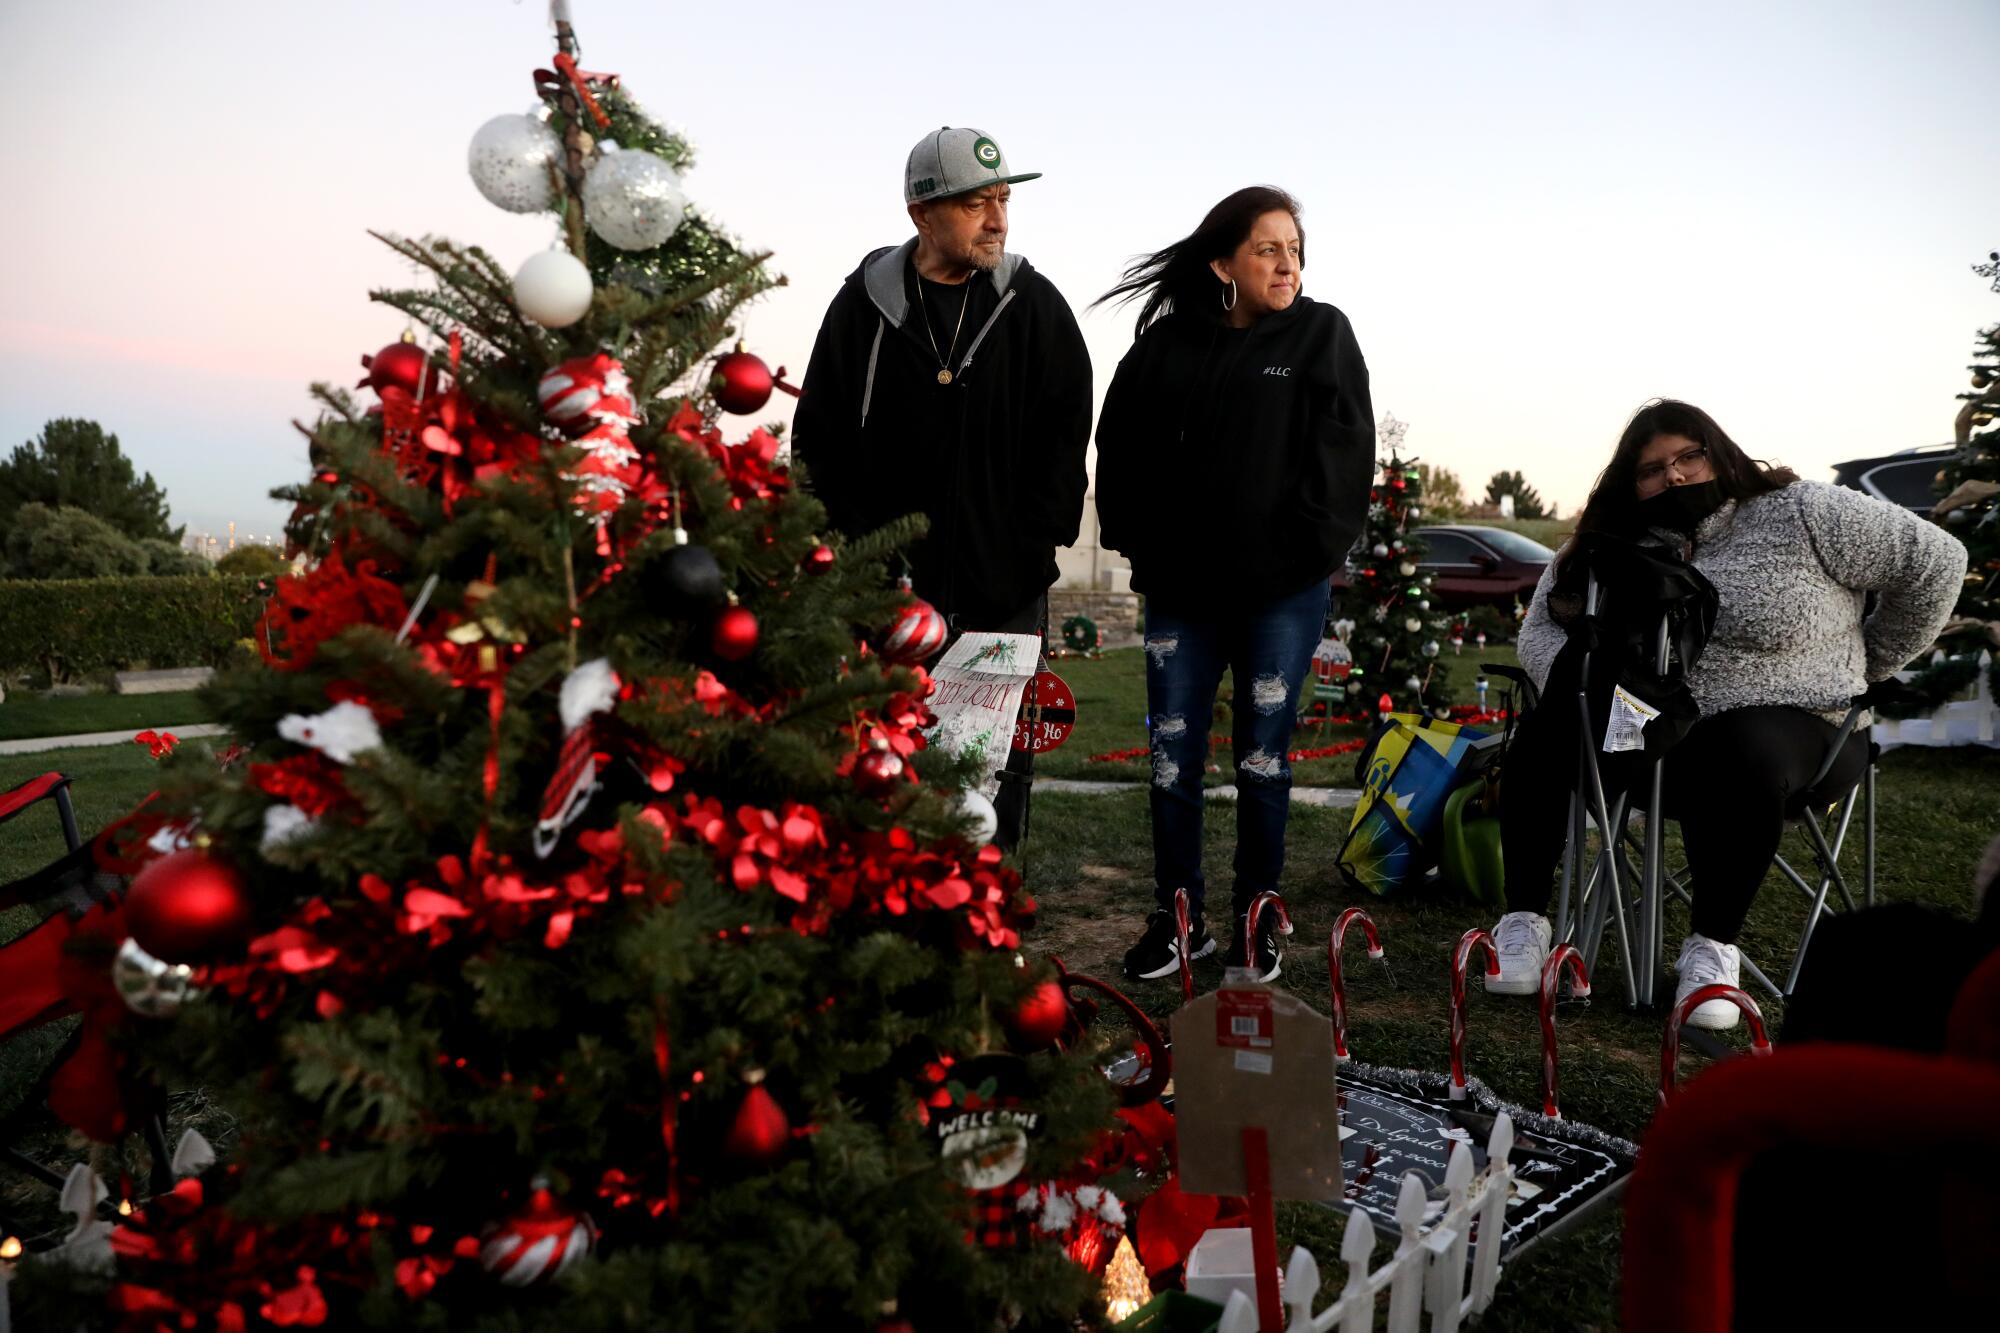 Three people, hands in jackets and hair blowing in the wind, gather near a decorated Christmas tree at a gravesite.